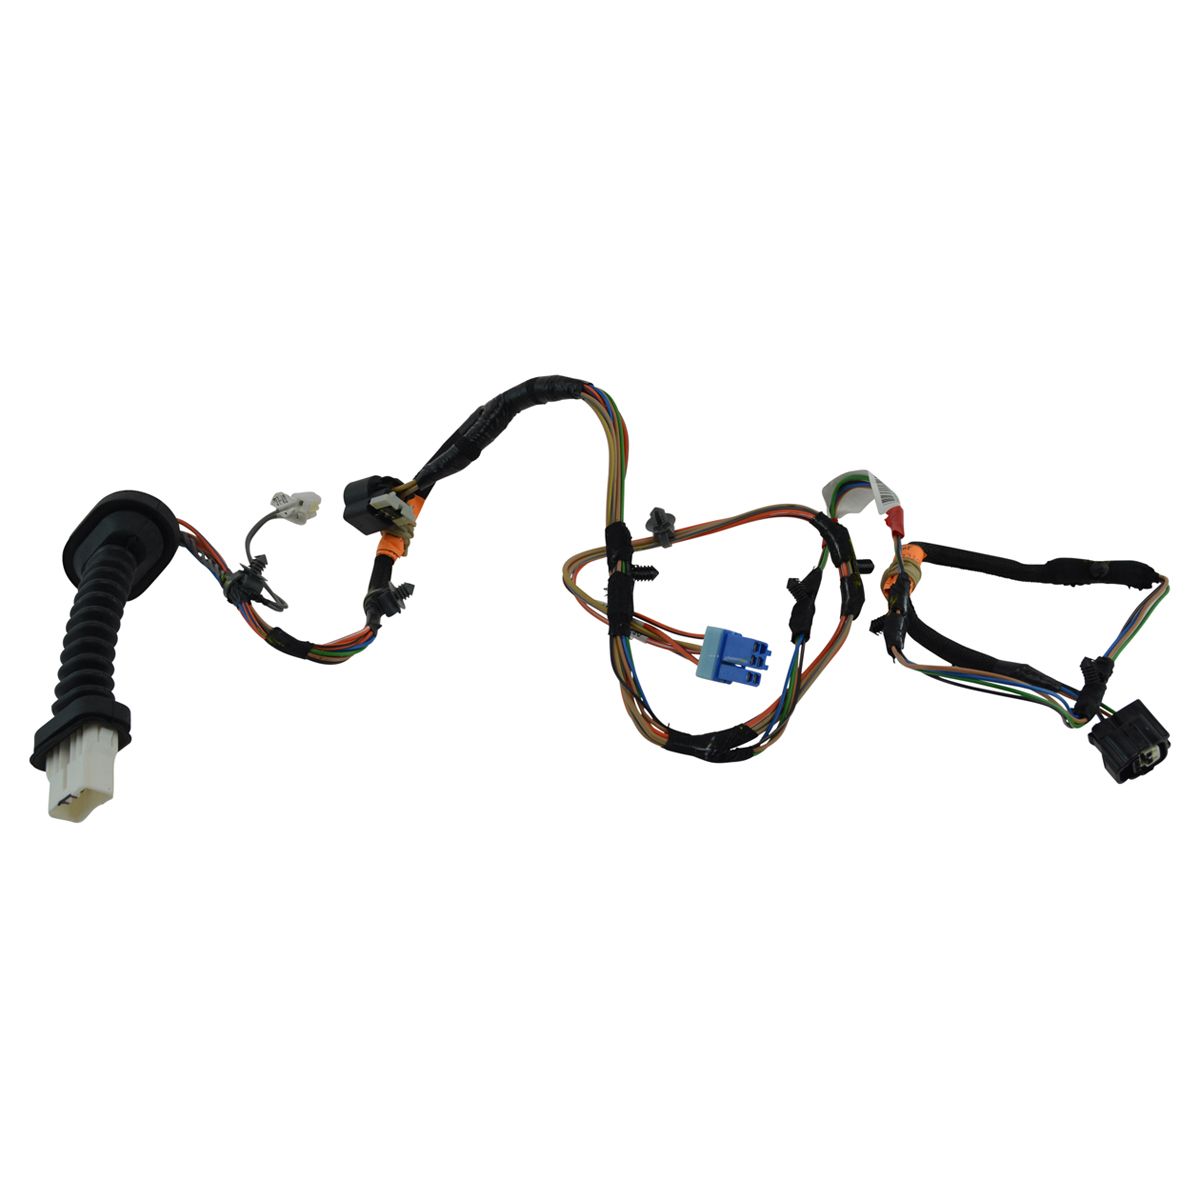 Dodge Truck Wiring Harness from am-ebay-images-items.s3.amazonaws.com